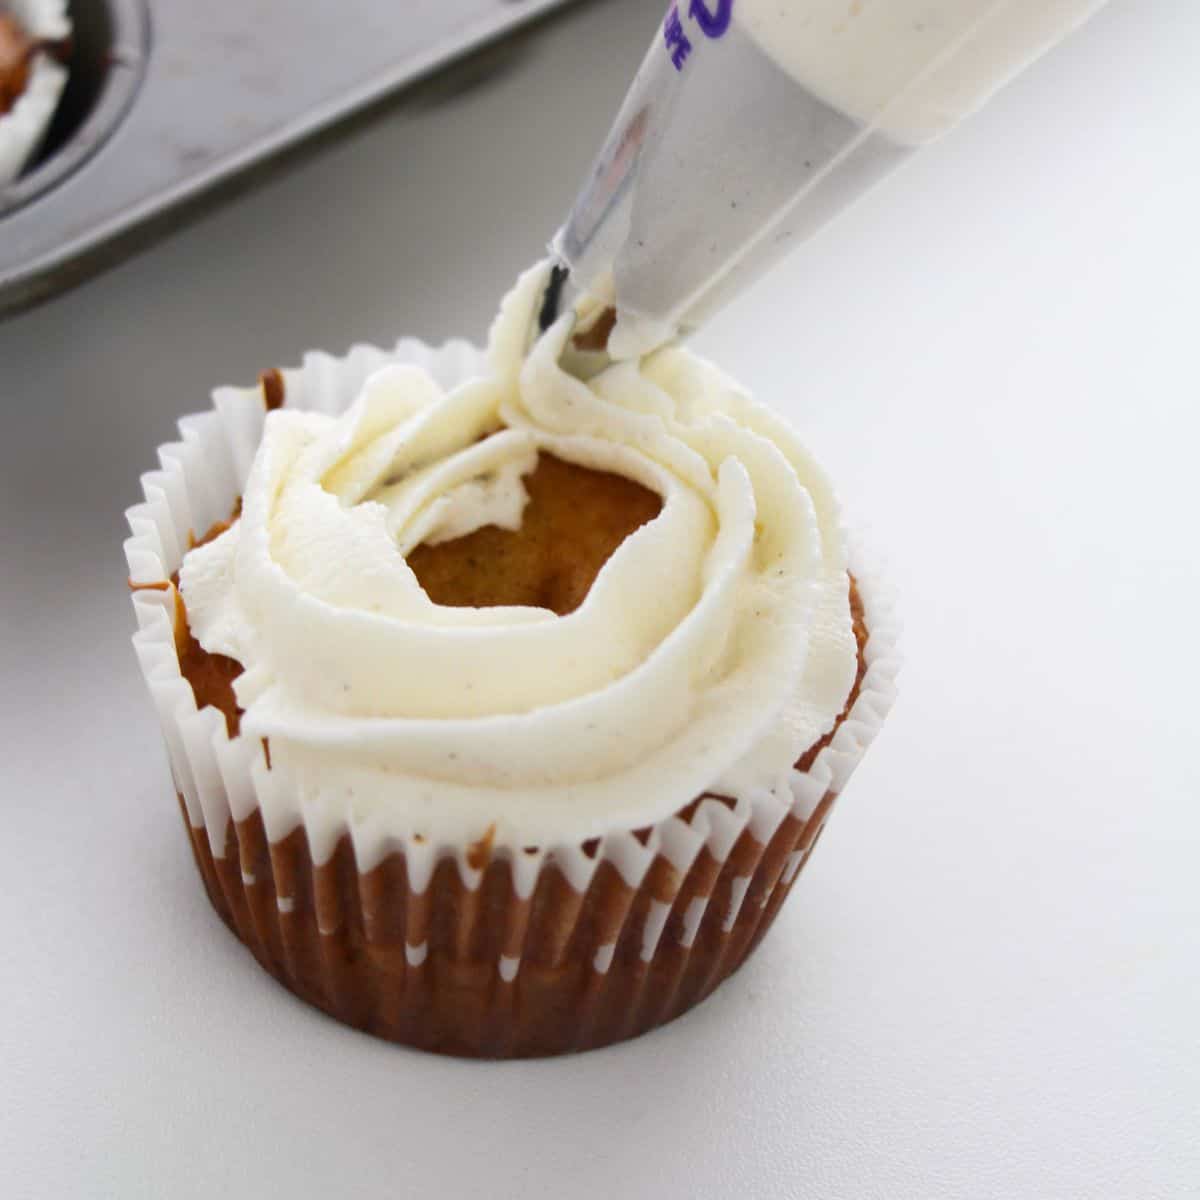 A cupcake being frosted with vanilla cinnamon frosting through a piping bag.